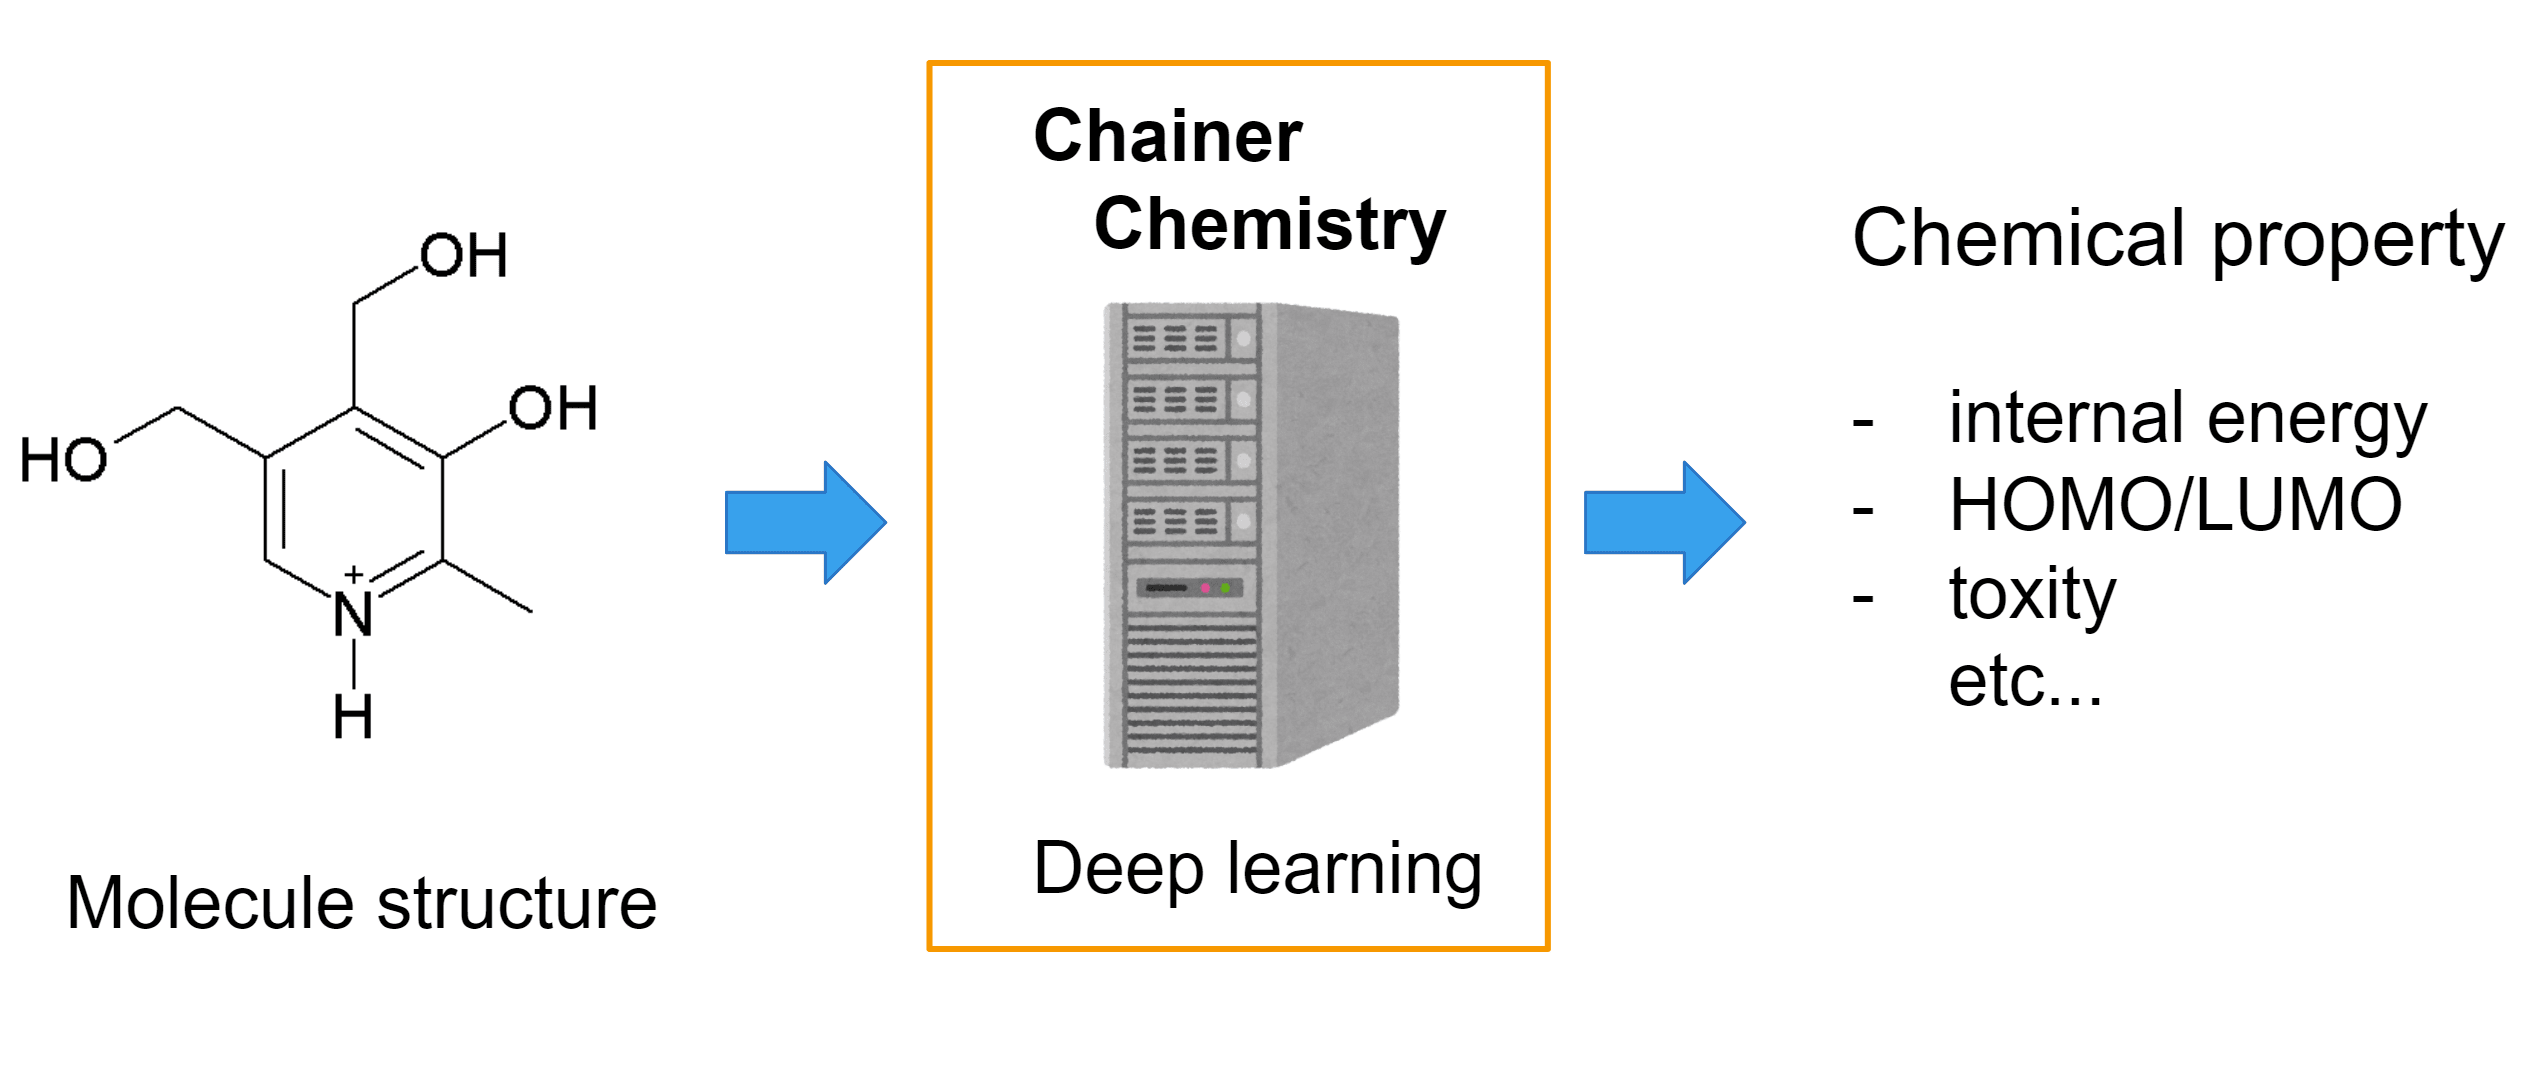 https://raw.githubusercontent.com/chainer/chainer-chemistry/master/assets/chainer-chemistry-overview.png